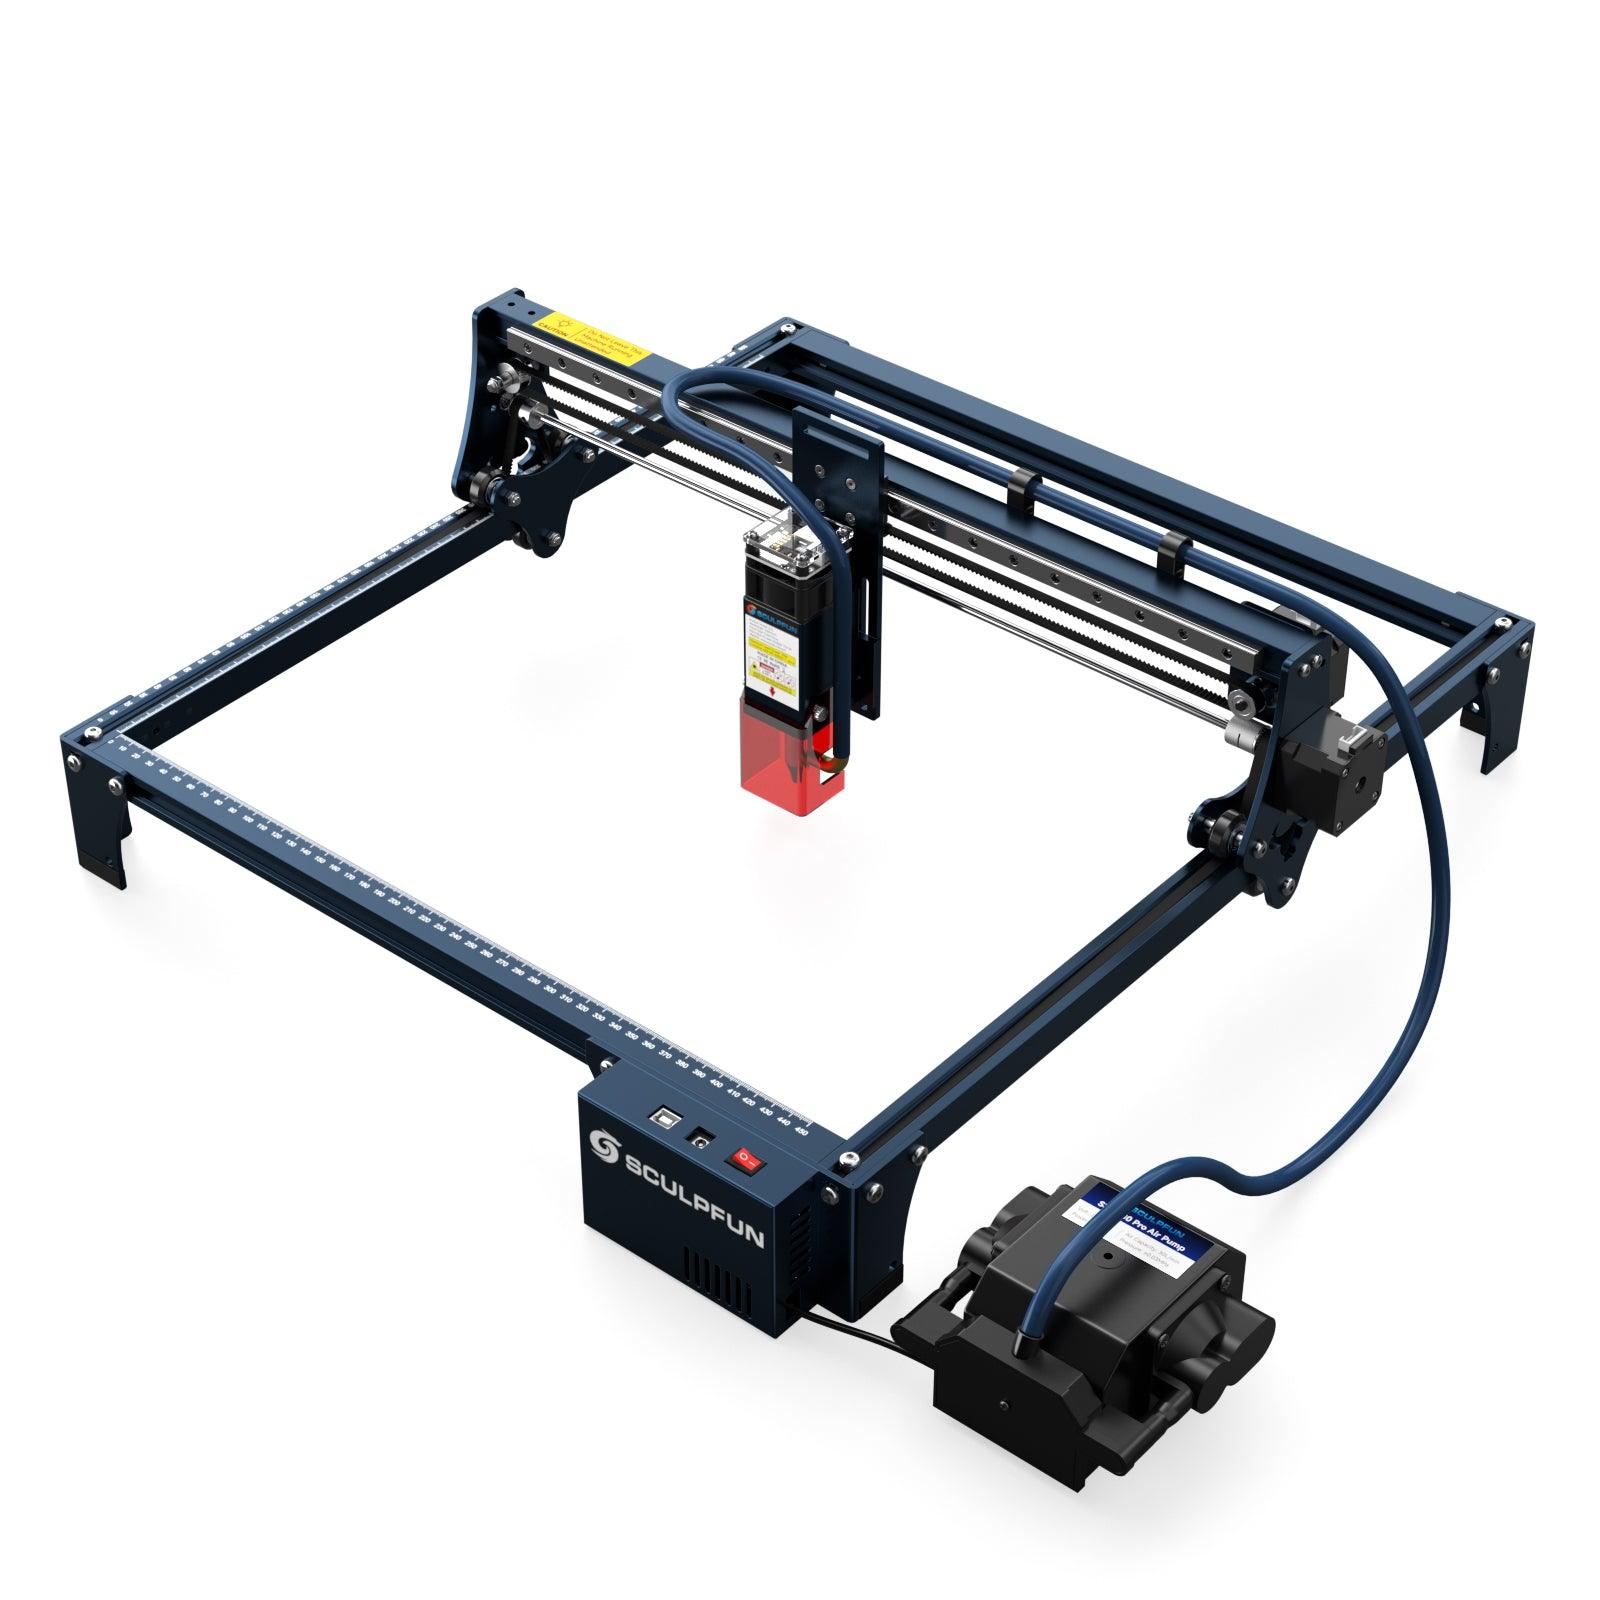 SCULPFUN S30 Pro 10W Laser Engraver for wood and leather